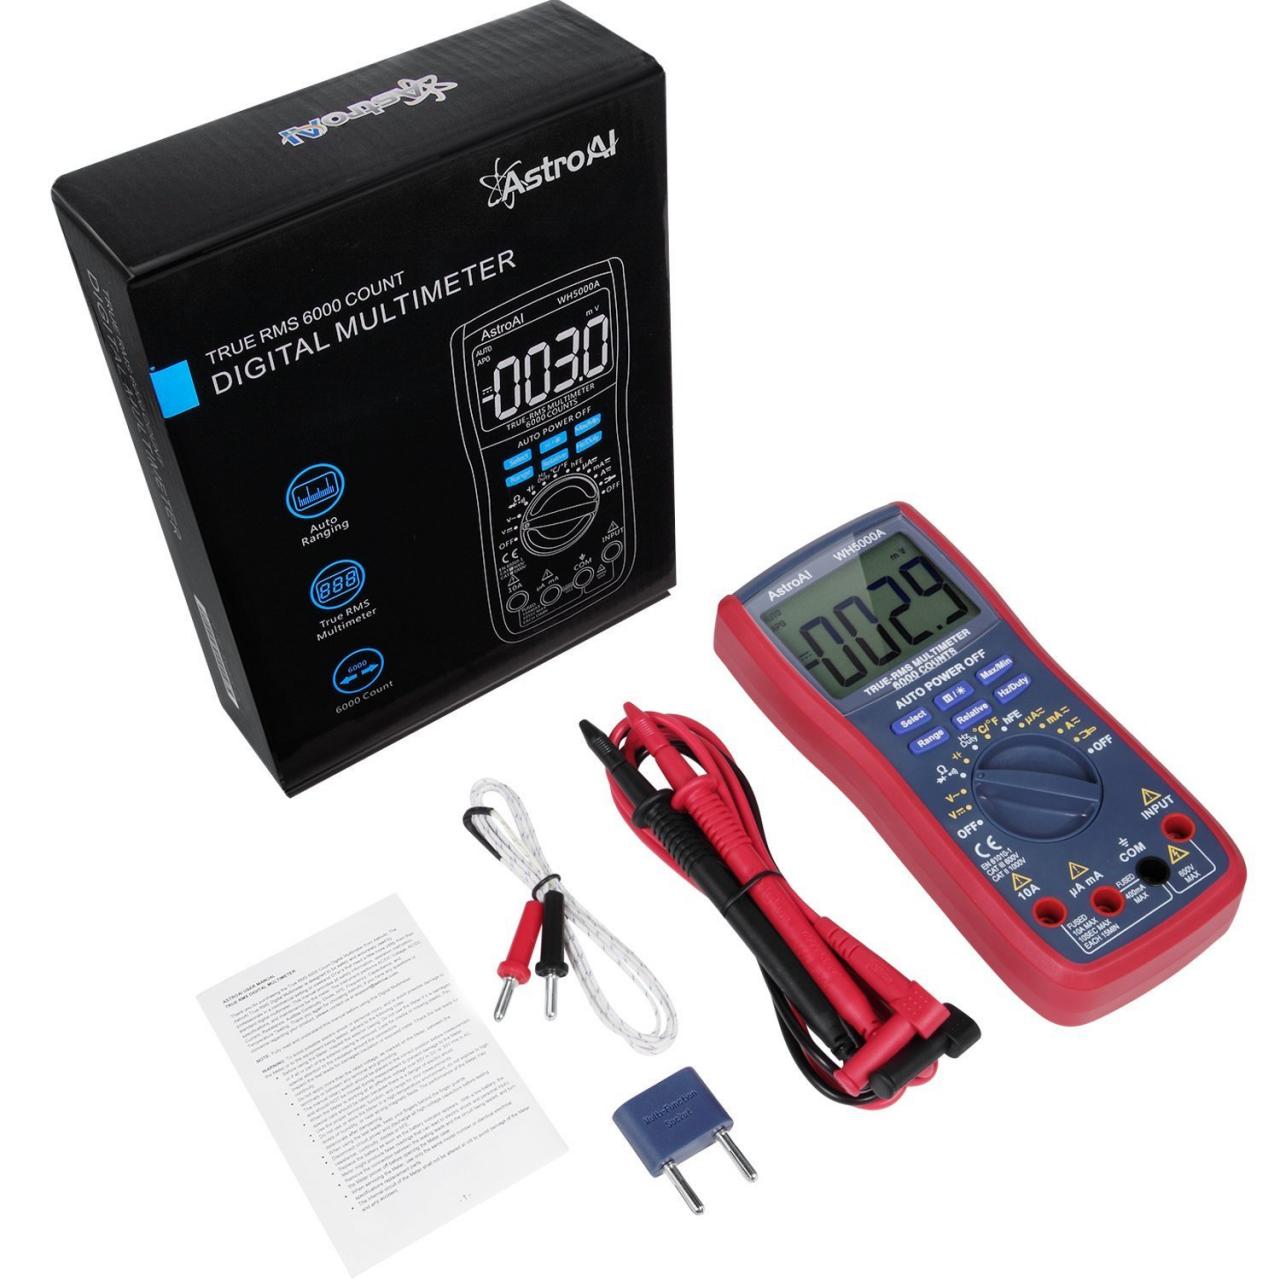 Frequency; Tests Diodes Red WH5000A TRMS 6000 Counts Volt Meter Manual and  Auto Ranging; Measures Voltage Tester Current Transistors Resistance  Temperature Continuity AstroAI Digital Multimeter Multimeters Test, Measure  & Inspect